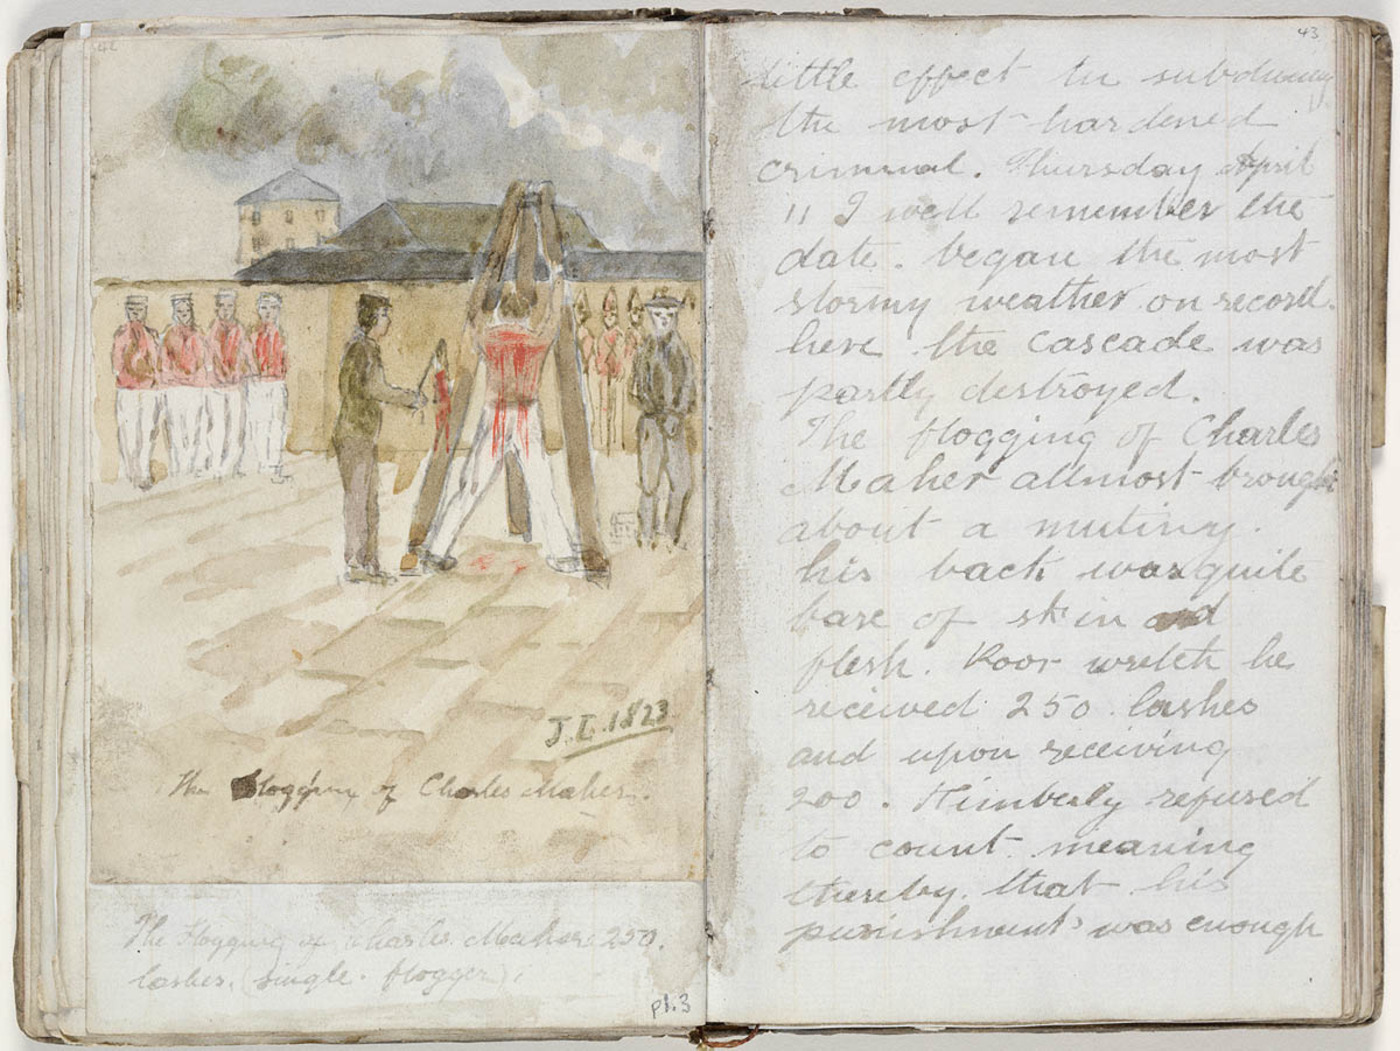 Norfolk Island flogging 1823, State Library of NSW